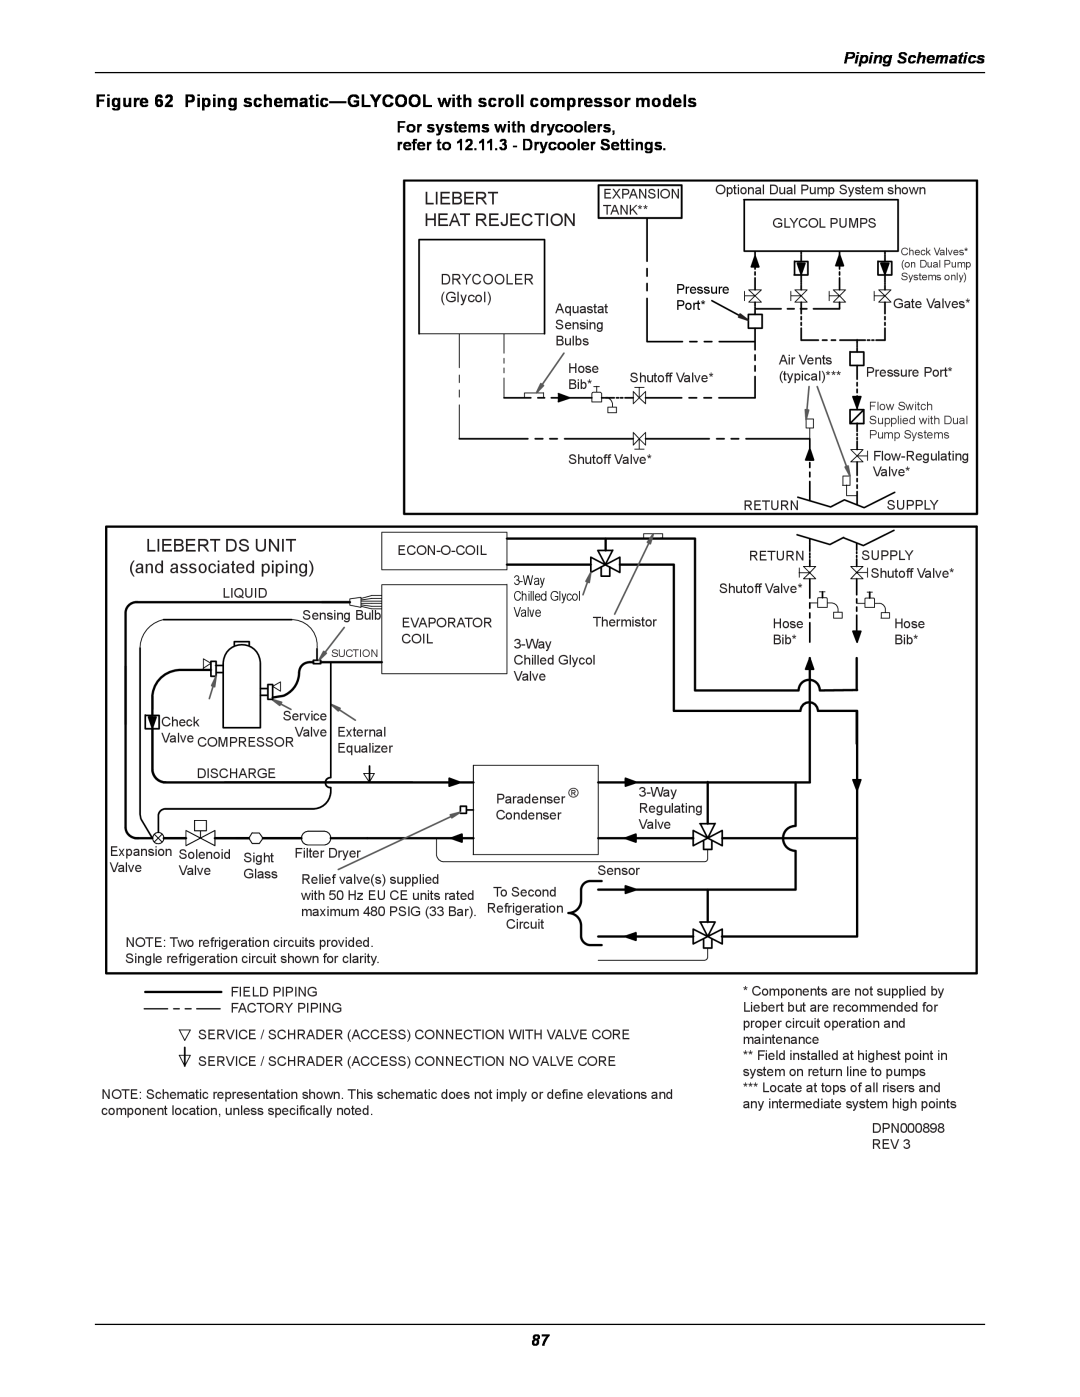 Liebert DS user manual Liebert, Heat Rejection, Piping schematic-GLYCOOL with scroll compressor models, Piping Schematics 